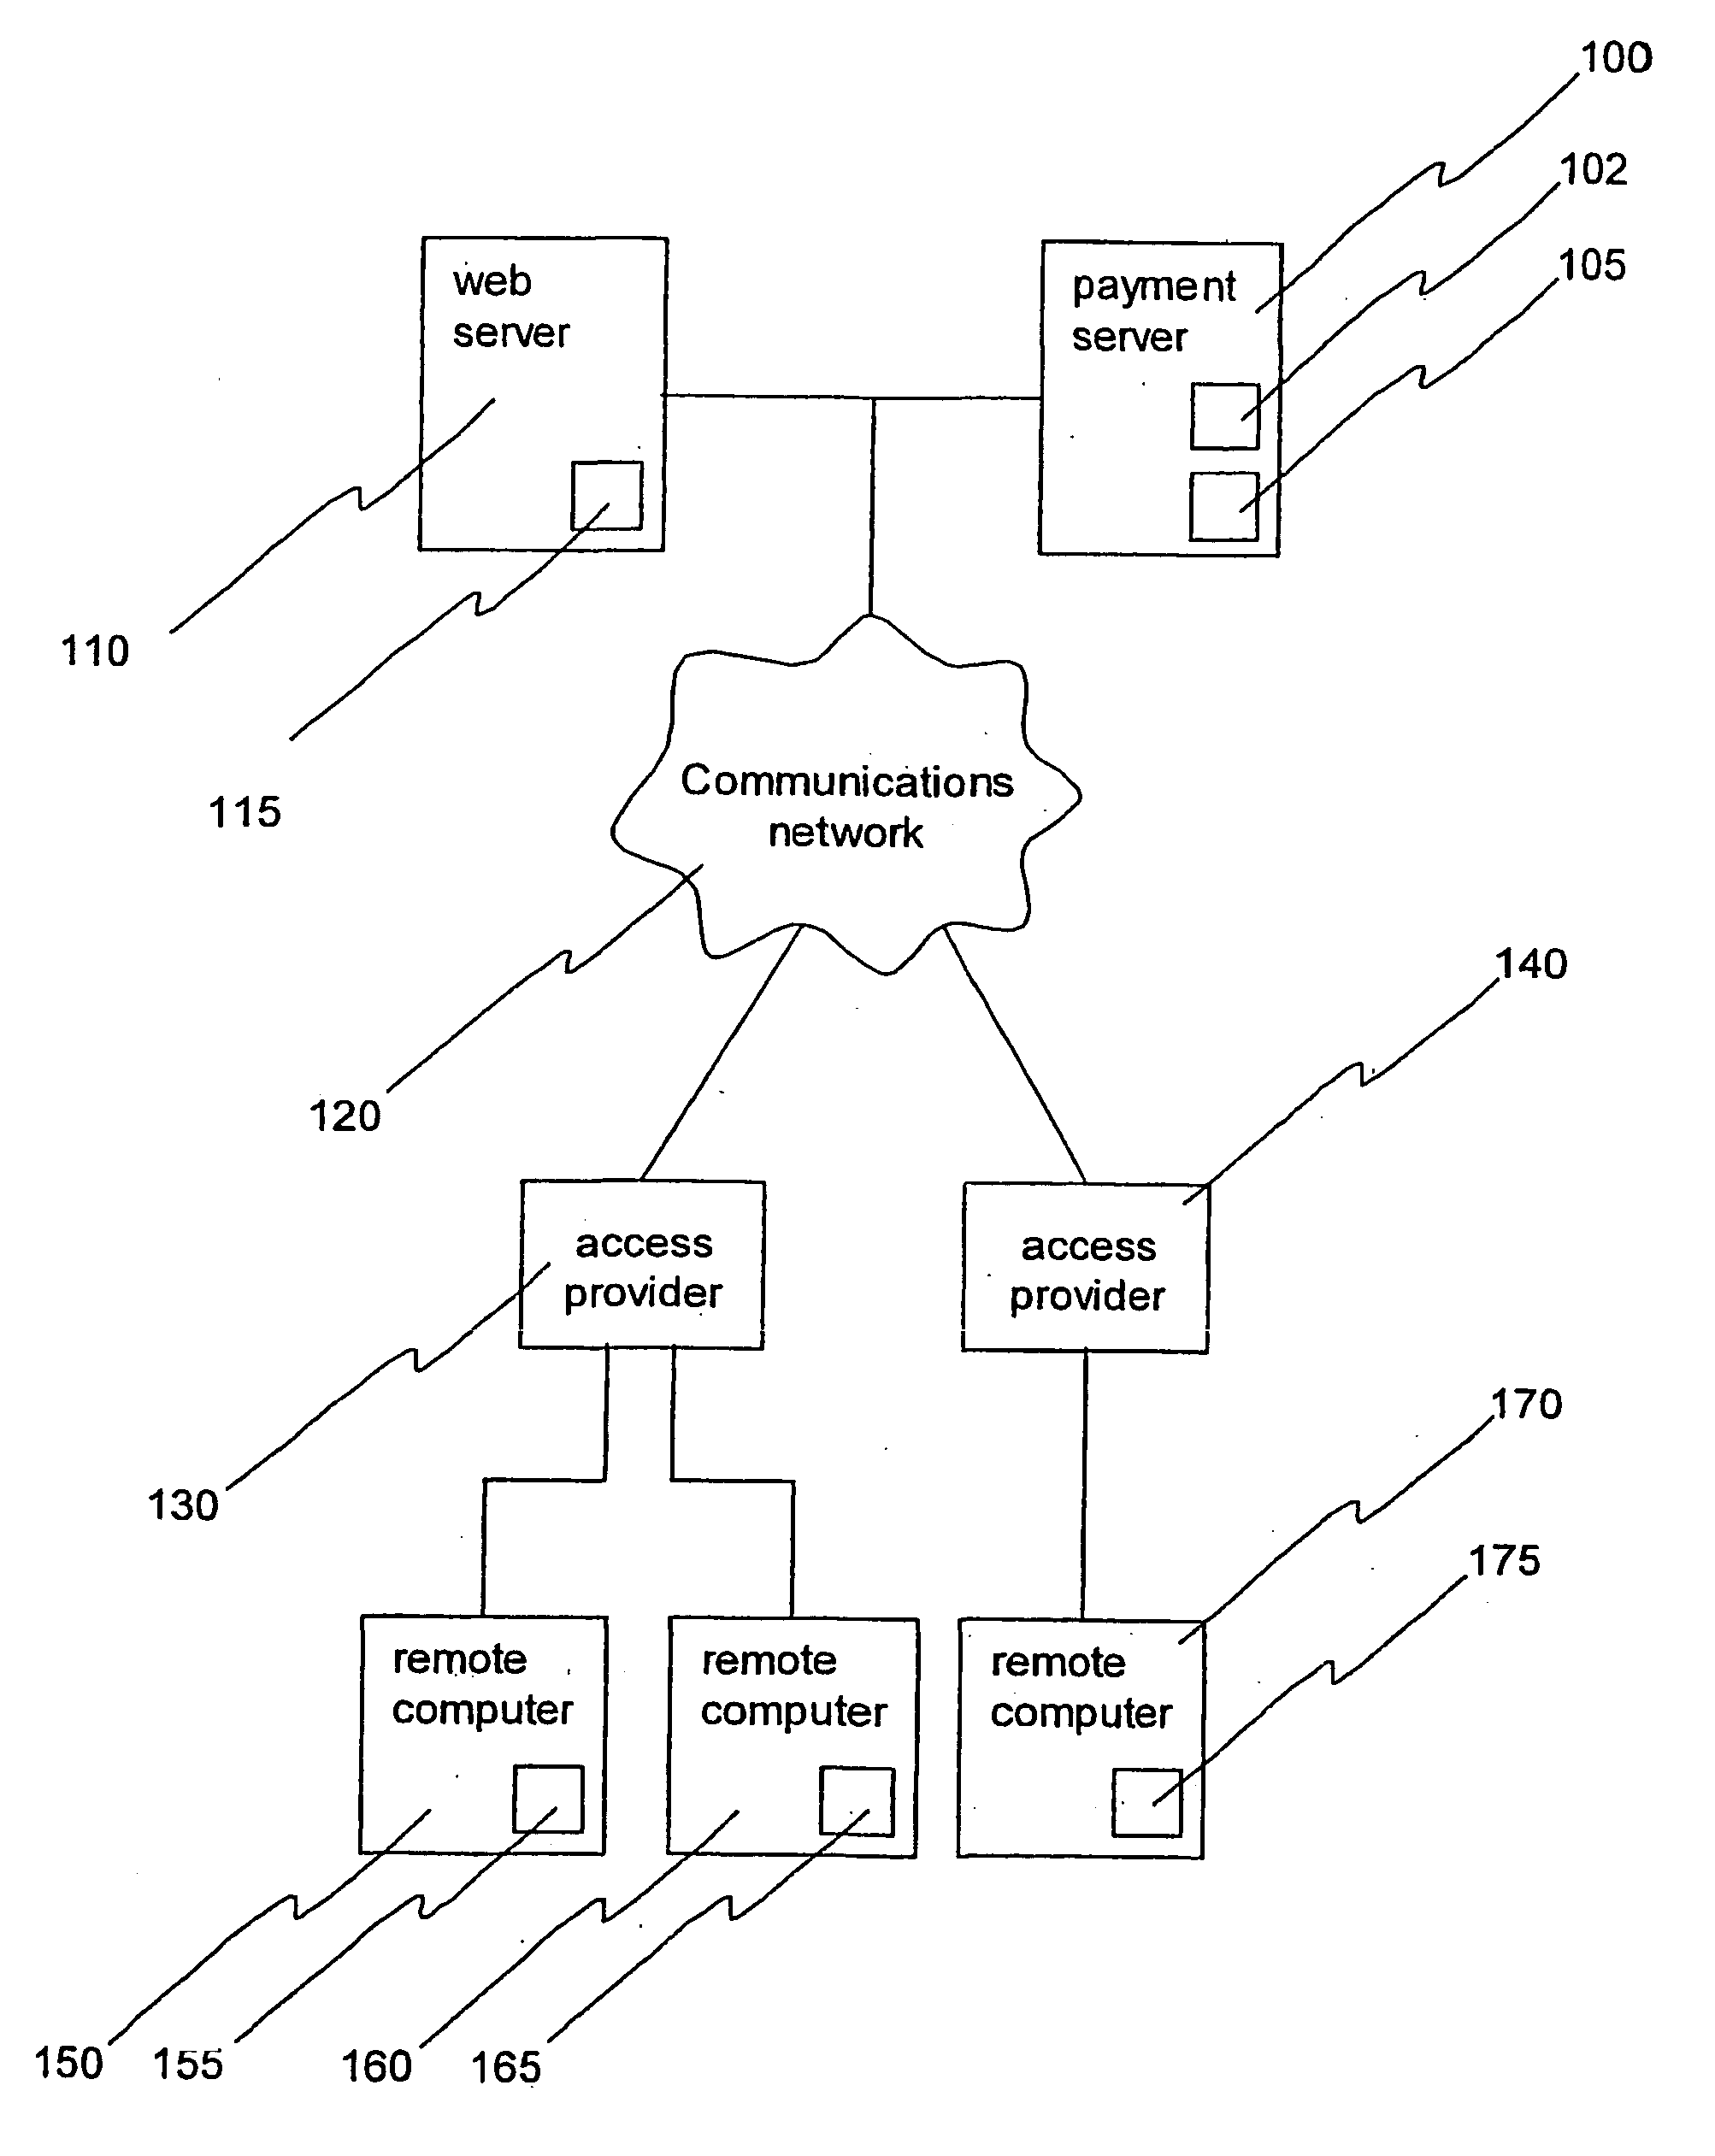 System and method for third party facilitation of electronic payments over a network of computers